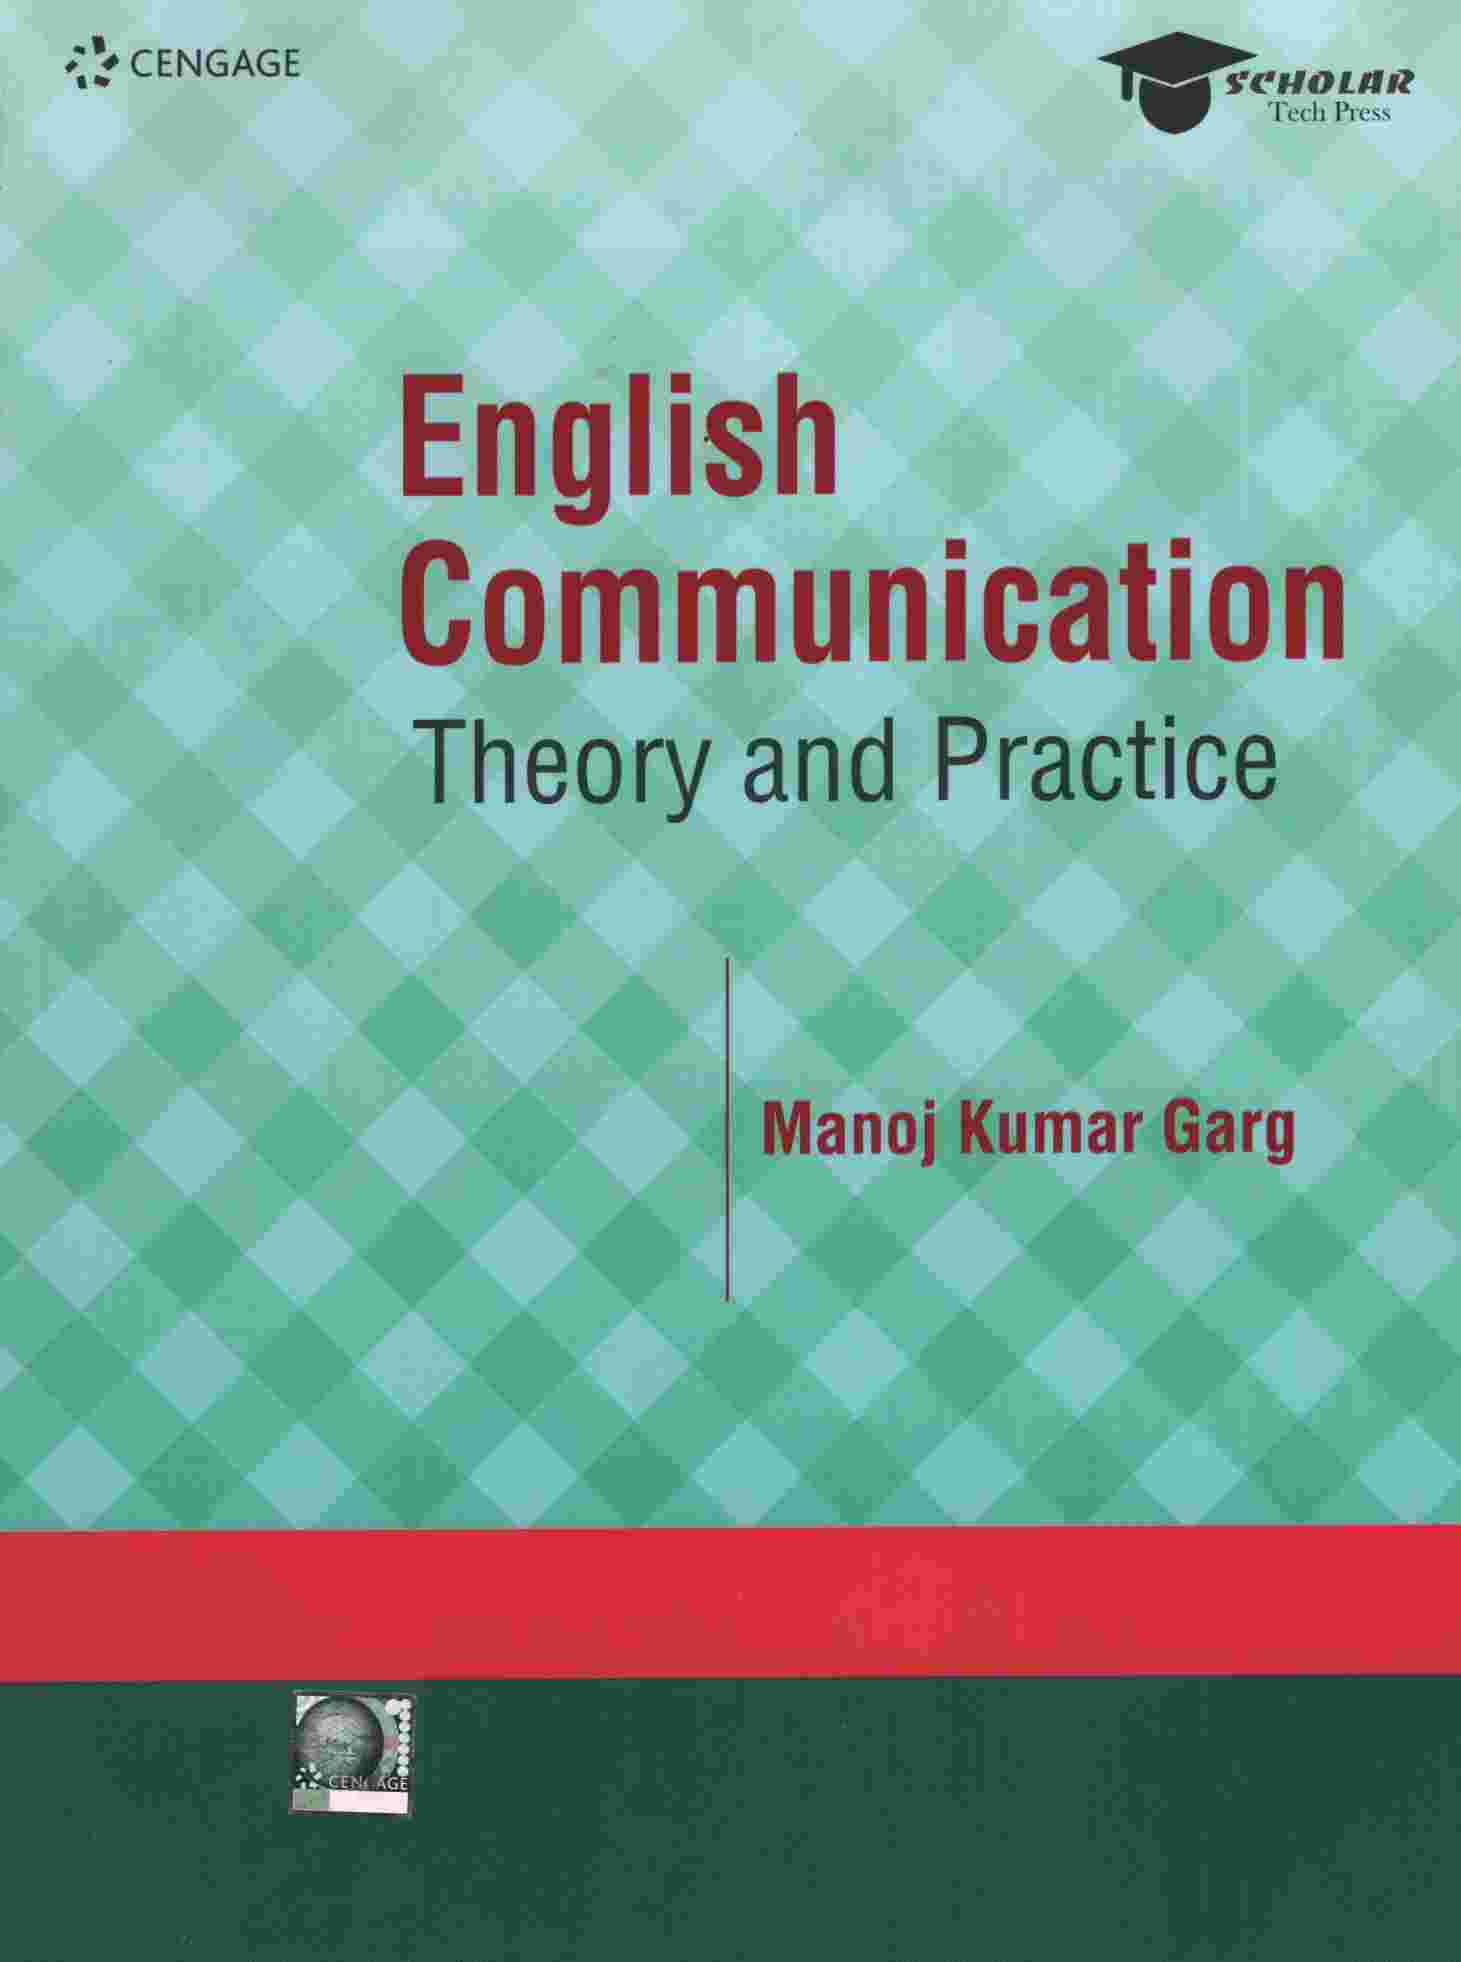 ENGLISH COMMUNICATION: THEORY AND PRACTICE